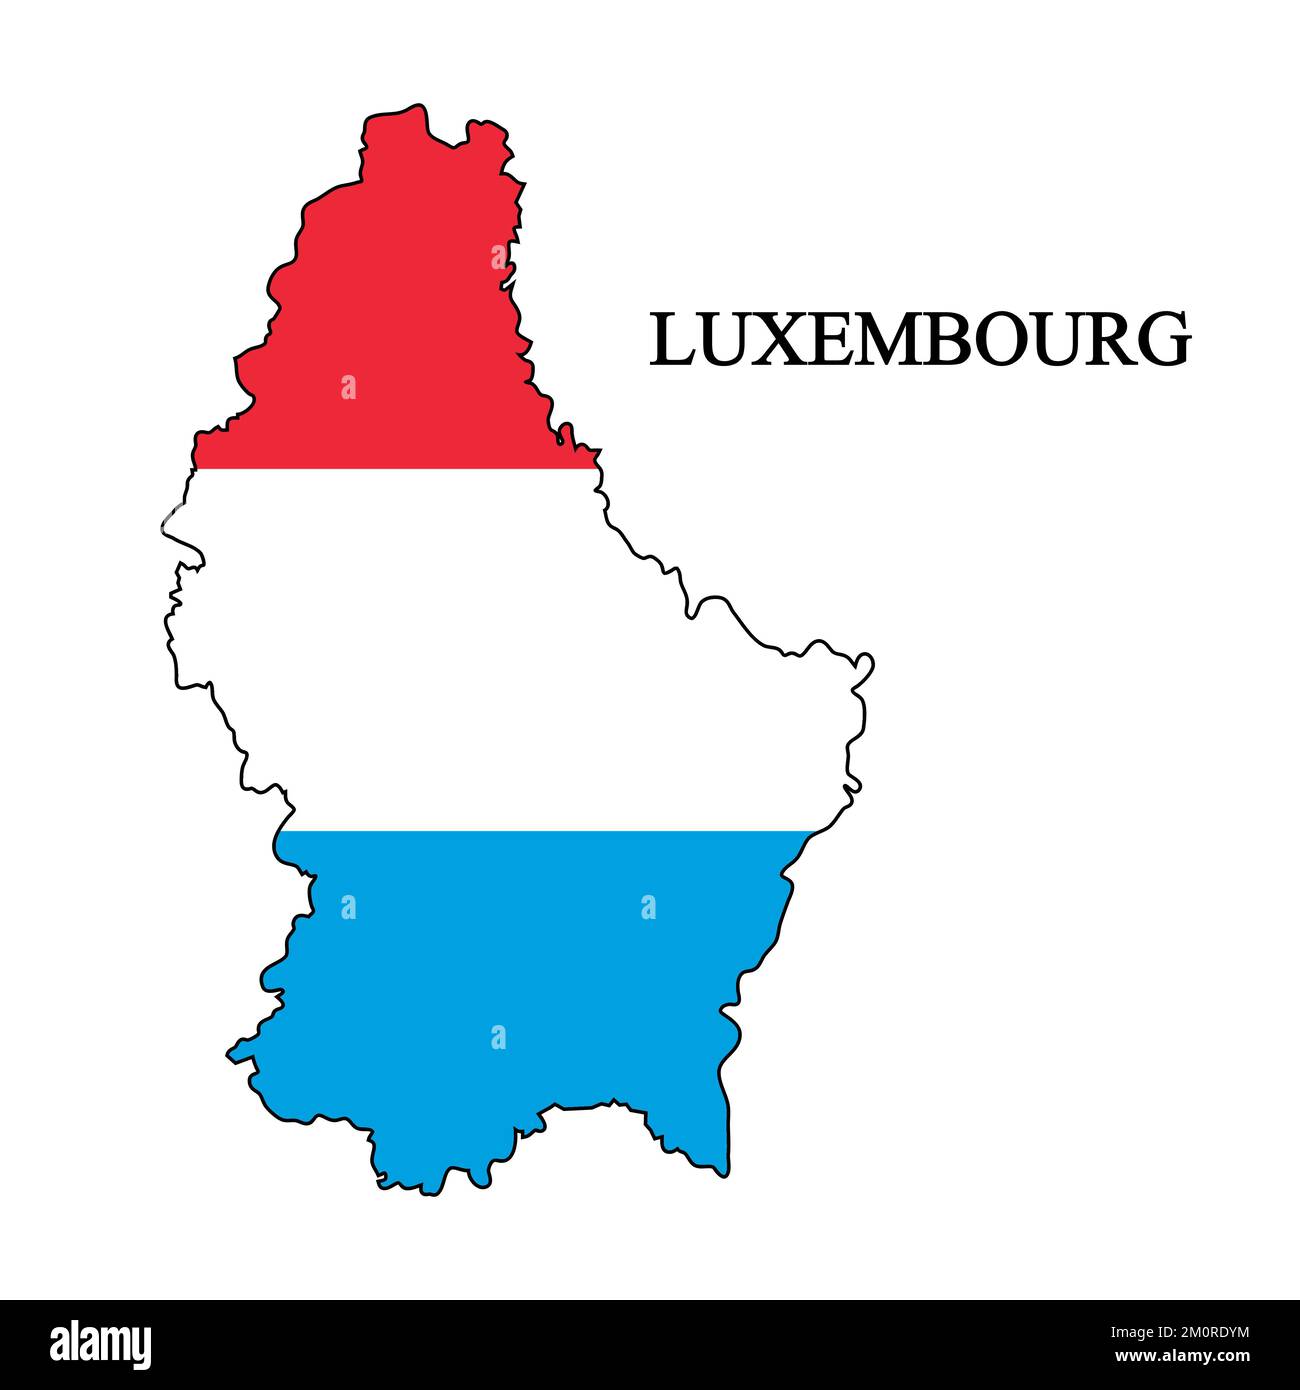 Luxembourg map vector illustration. Global economy. Famous country. Western Europe. Europe. Stock Vector